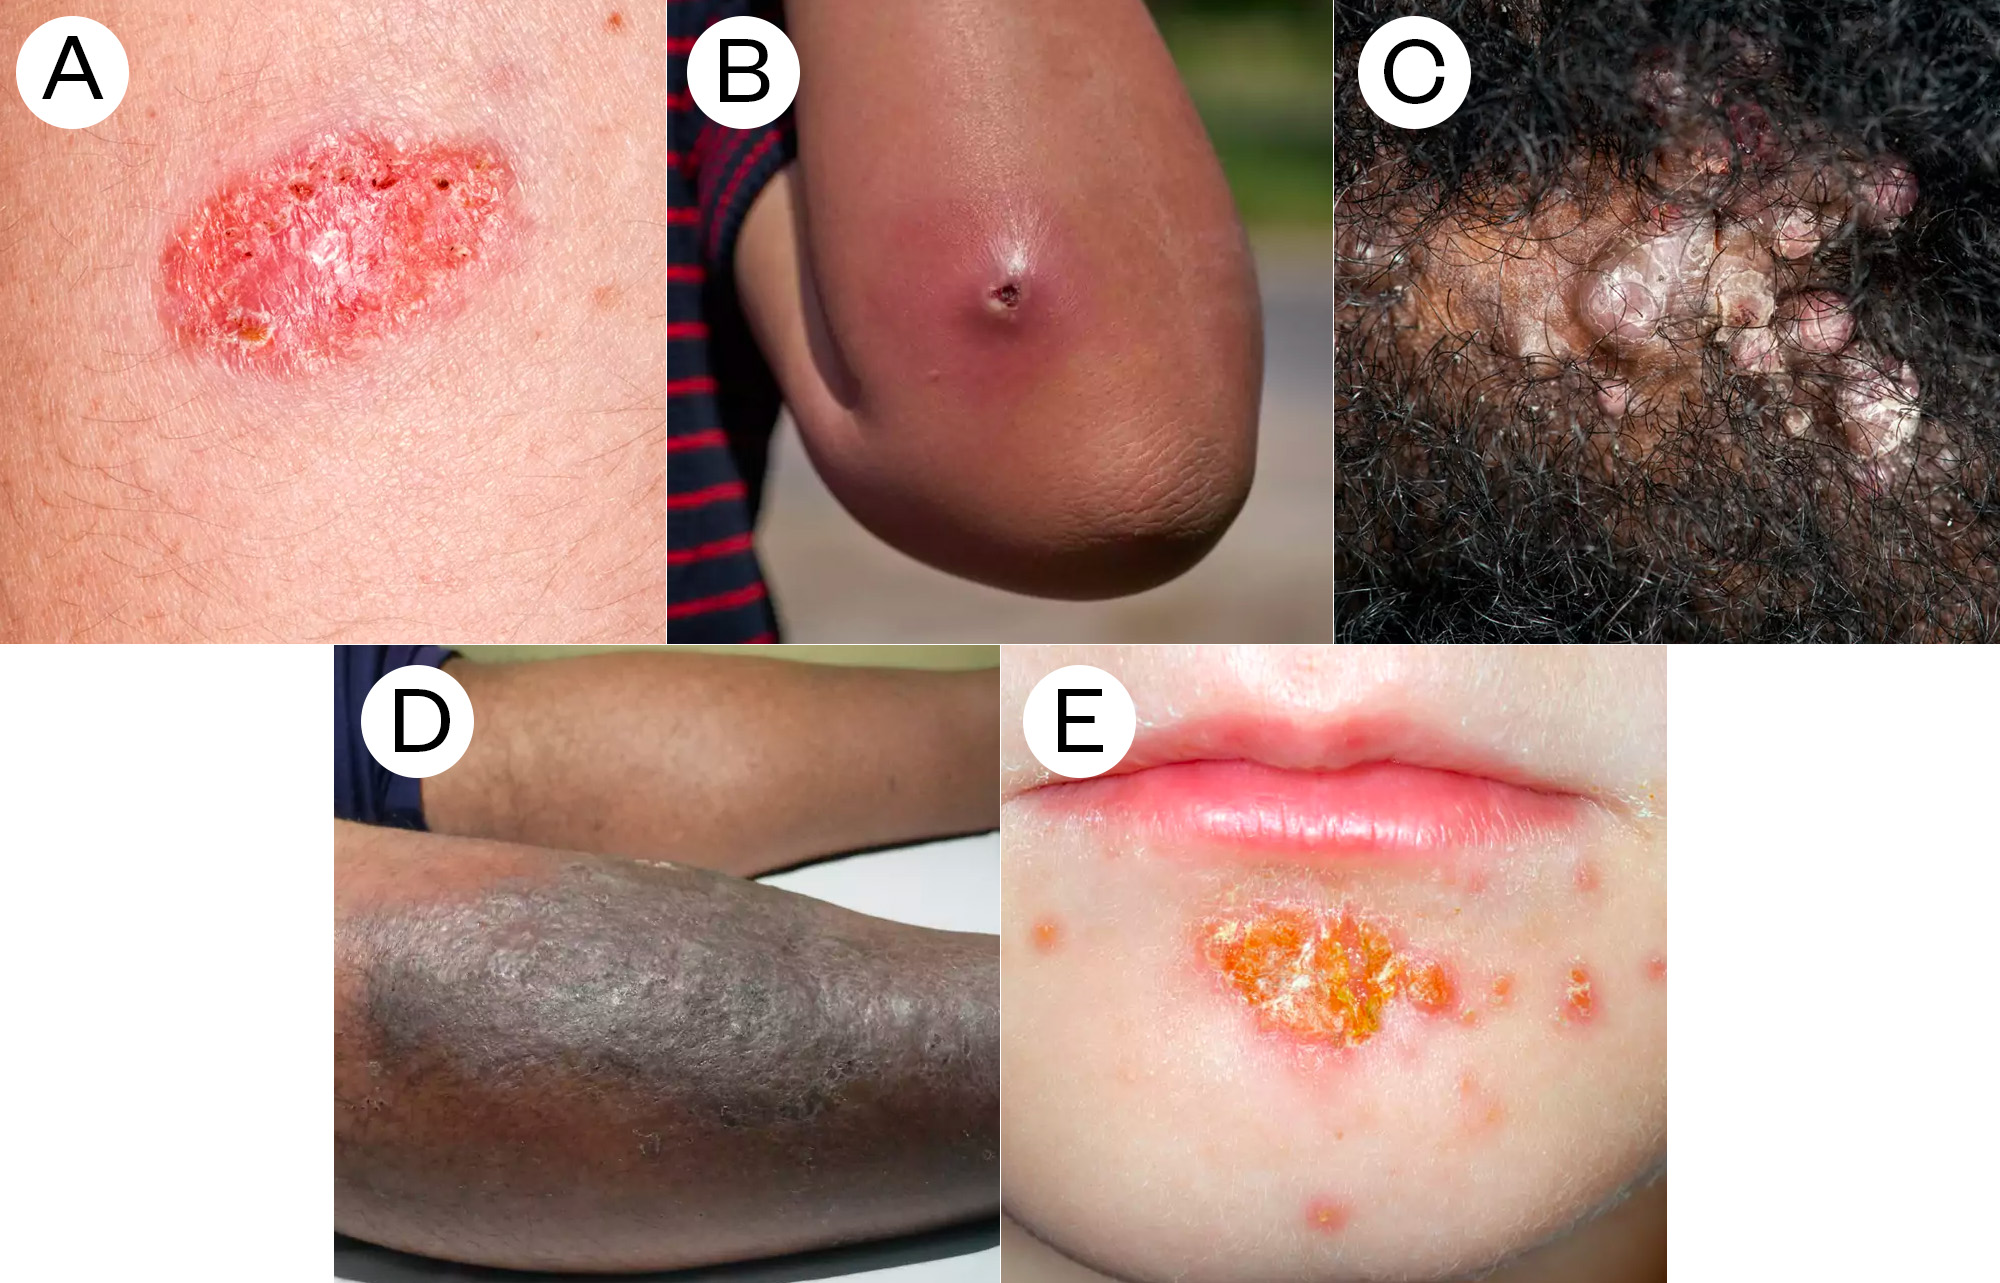 Photos of different kinds of skin and soft tissue infections